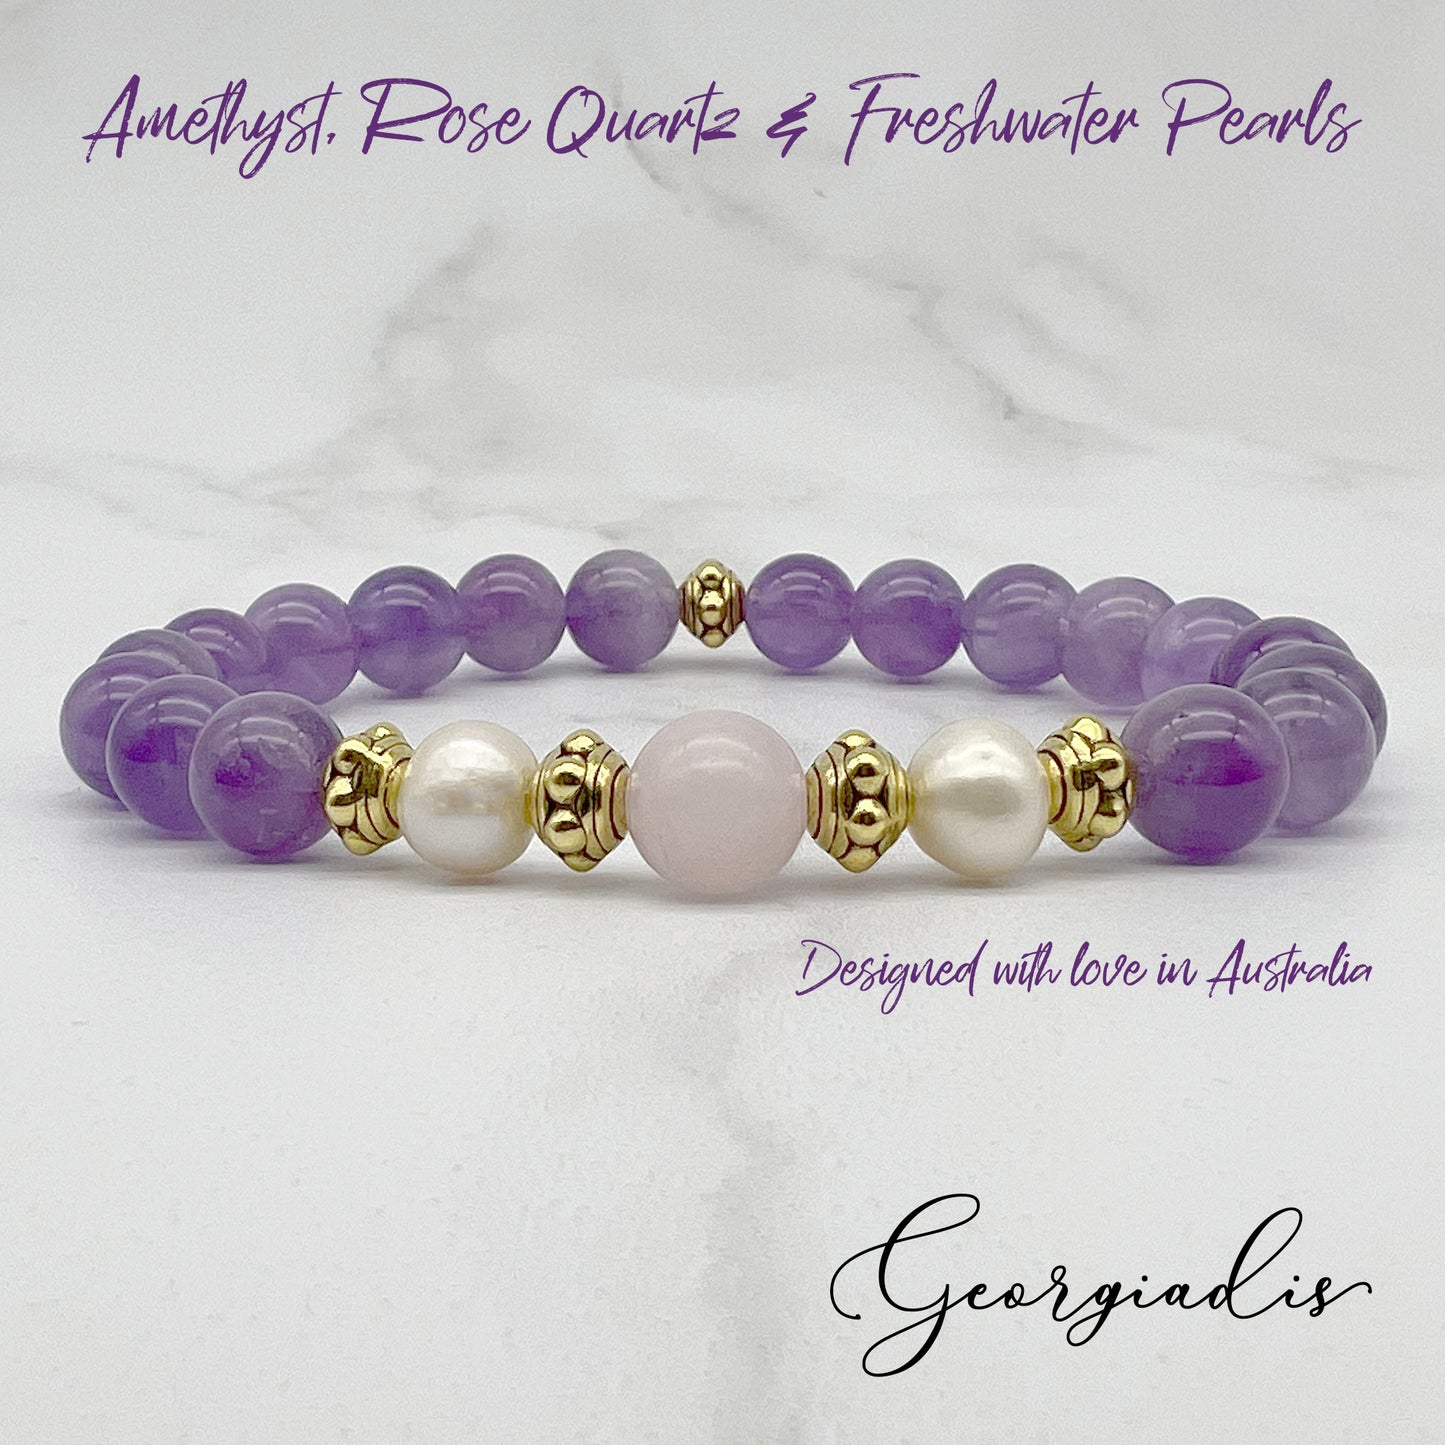 Beautiful Real Freshwater Pearls, Amethyst and Rose Quartz Bracelet, featuring Grade A, High Luster Pearls and Stunning Gemstones, Healing.